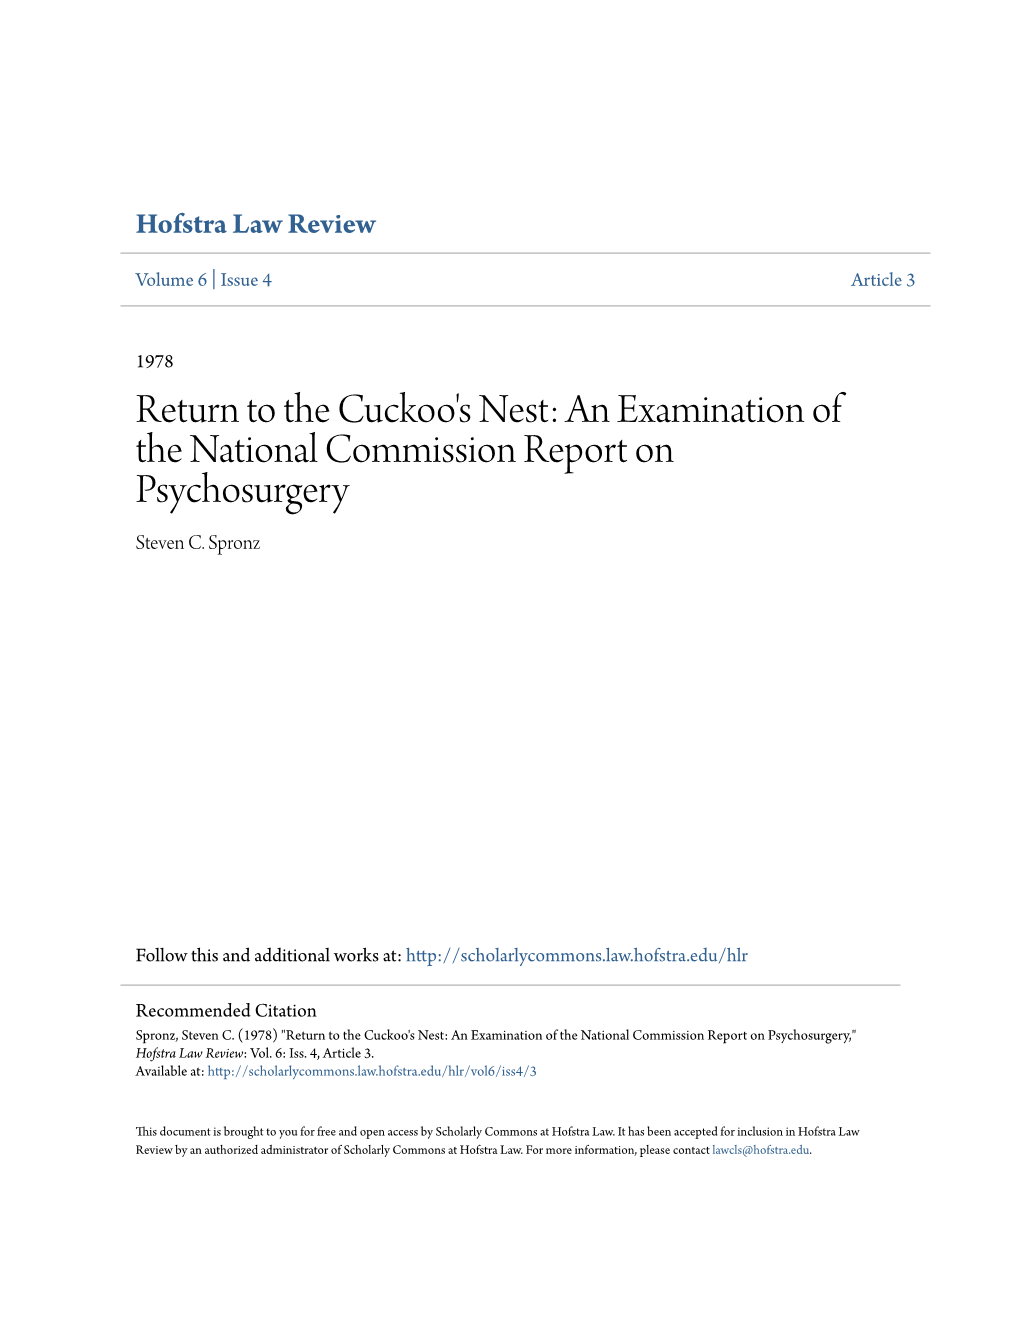 The Cuckoo's Nest: an Examination of the National Commission Report on Psychosurgery Steven C